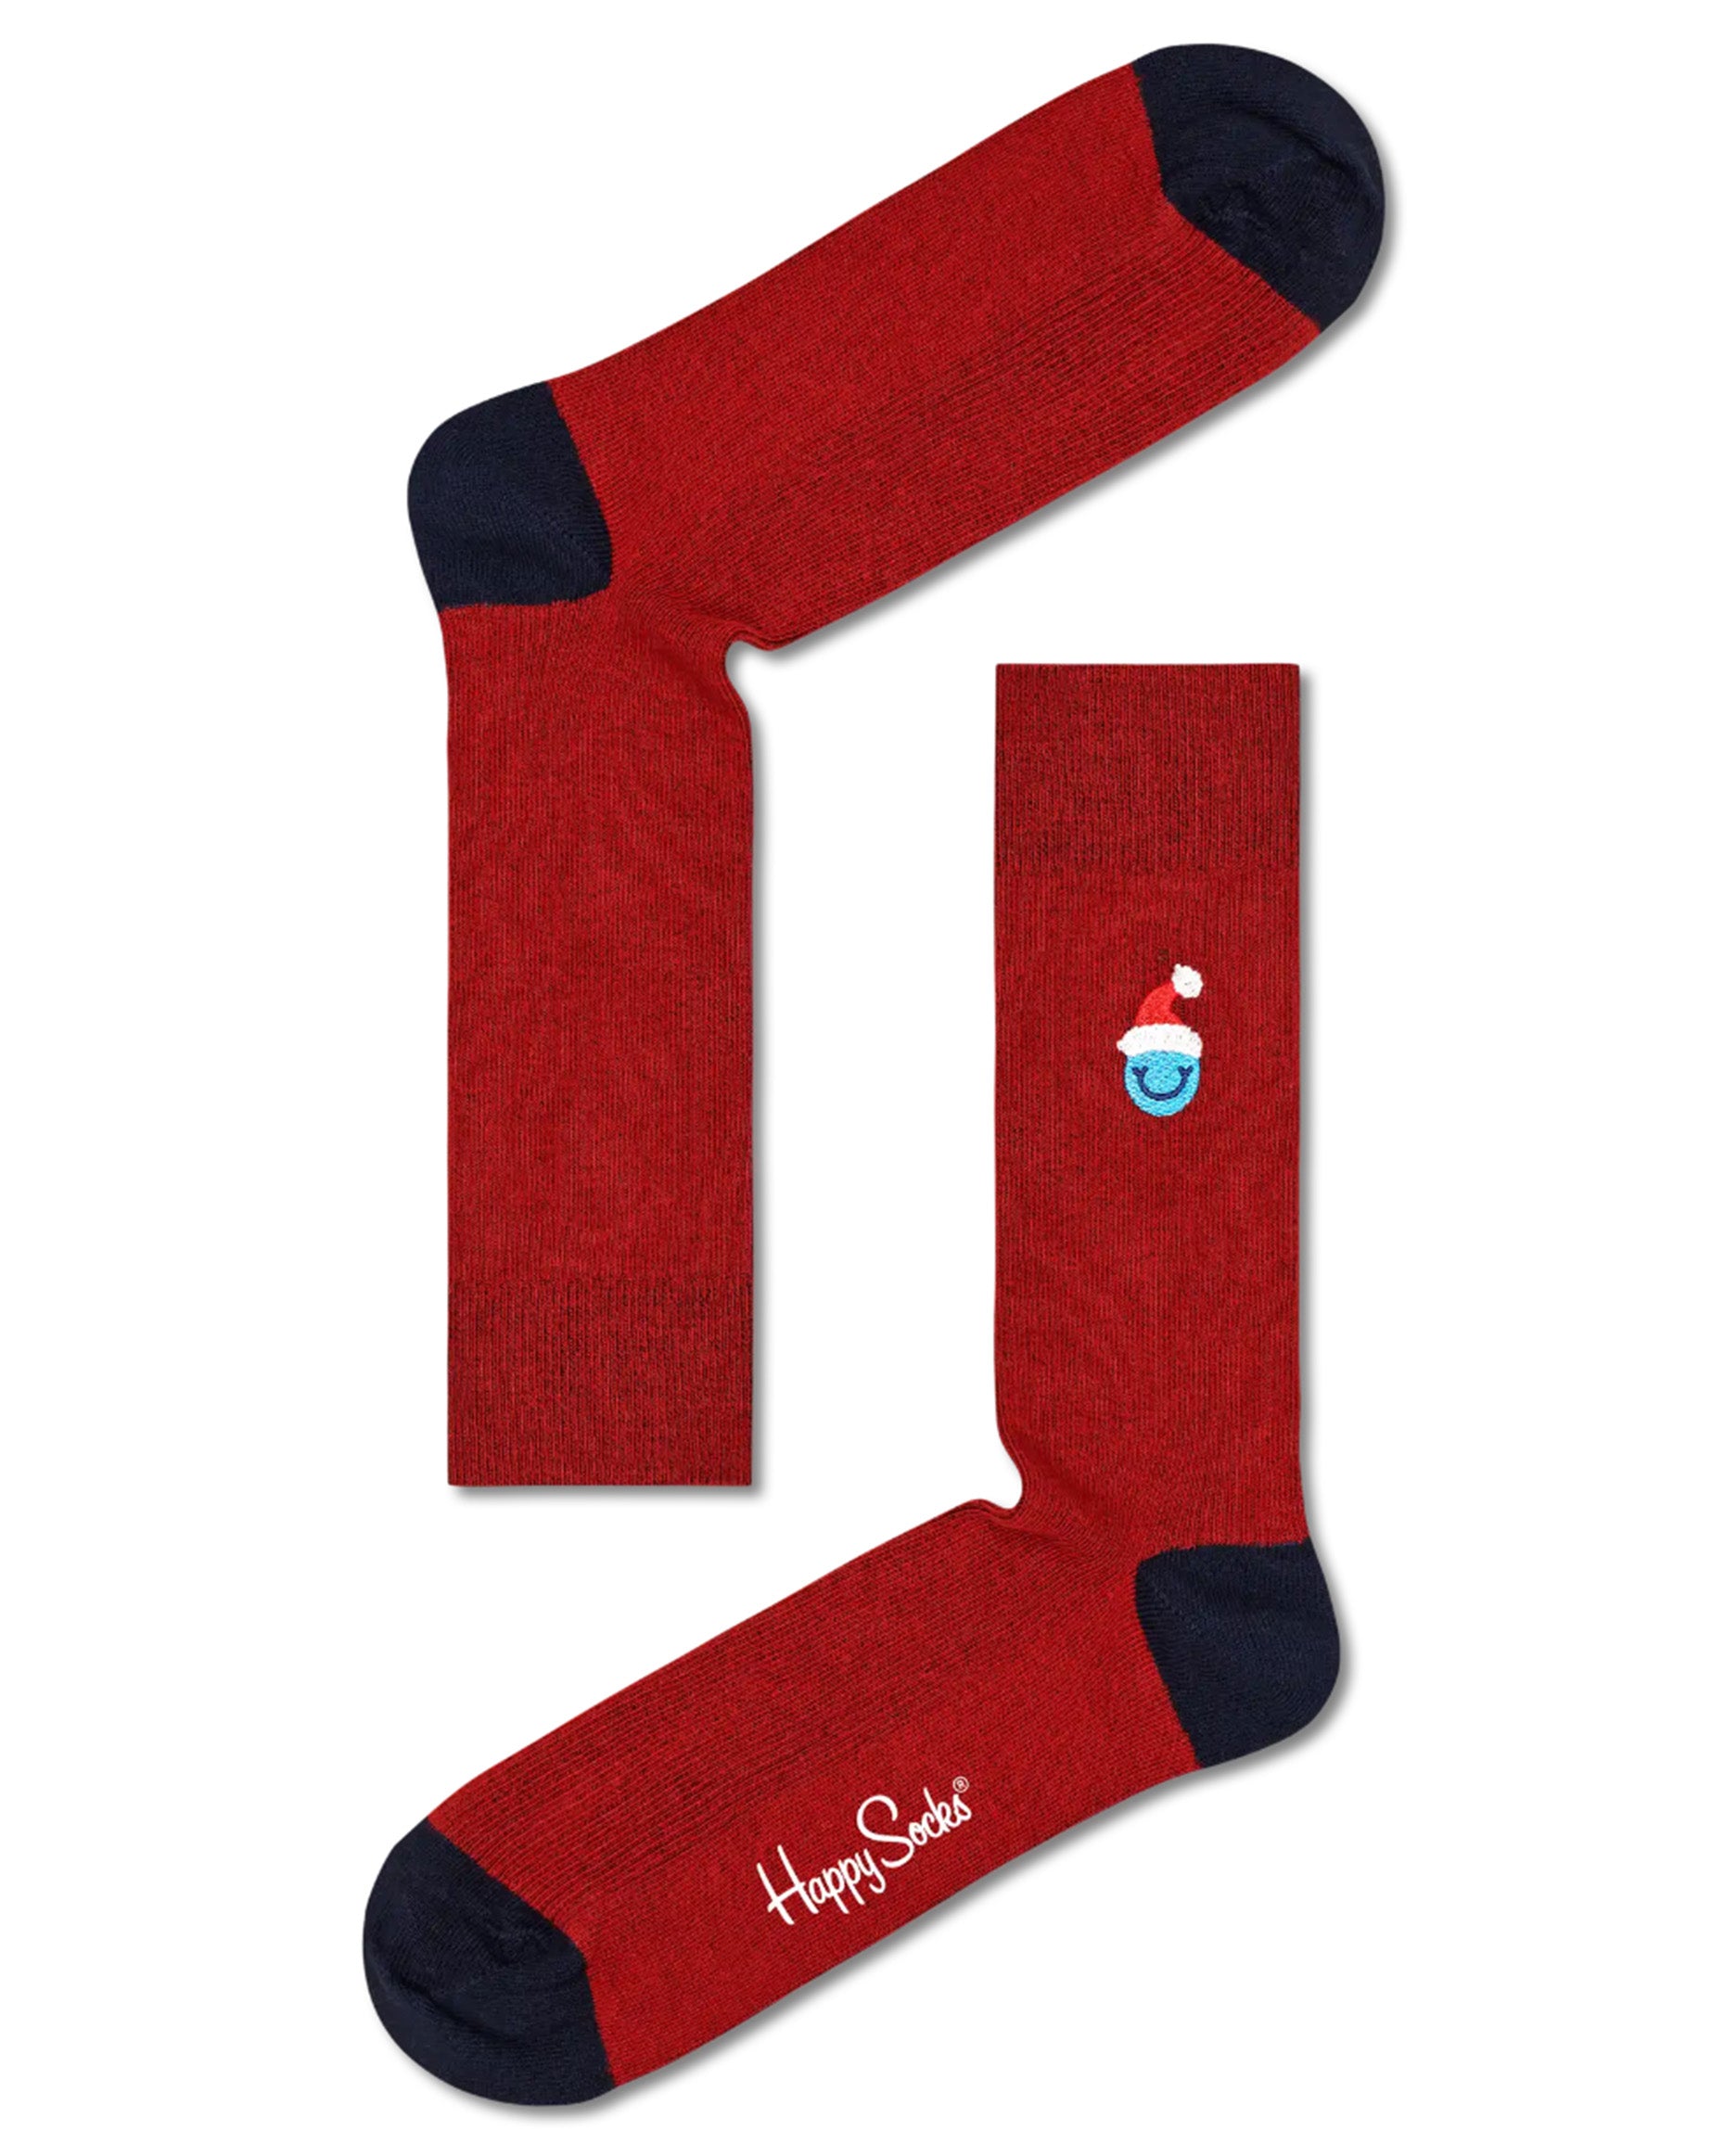 Happy Socks XDTG08-0200 Celebration Time Gift Set - Maroon crew length cotton socks with a small woven smiley face wearing a Santa hat motif, black toe and heel. 